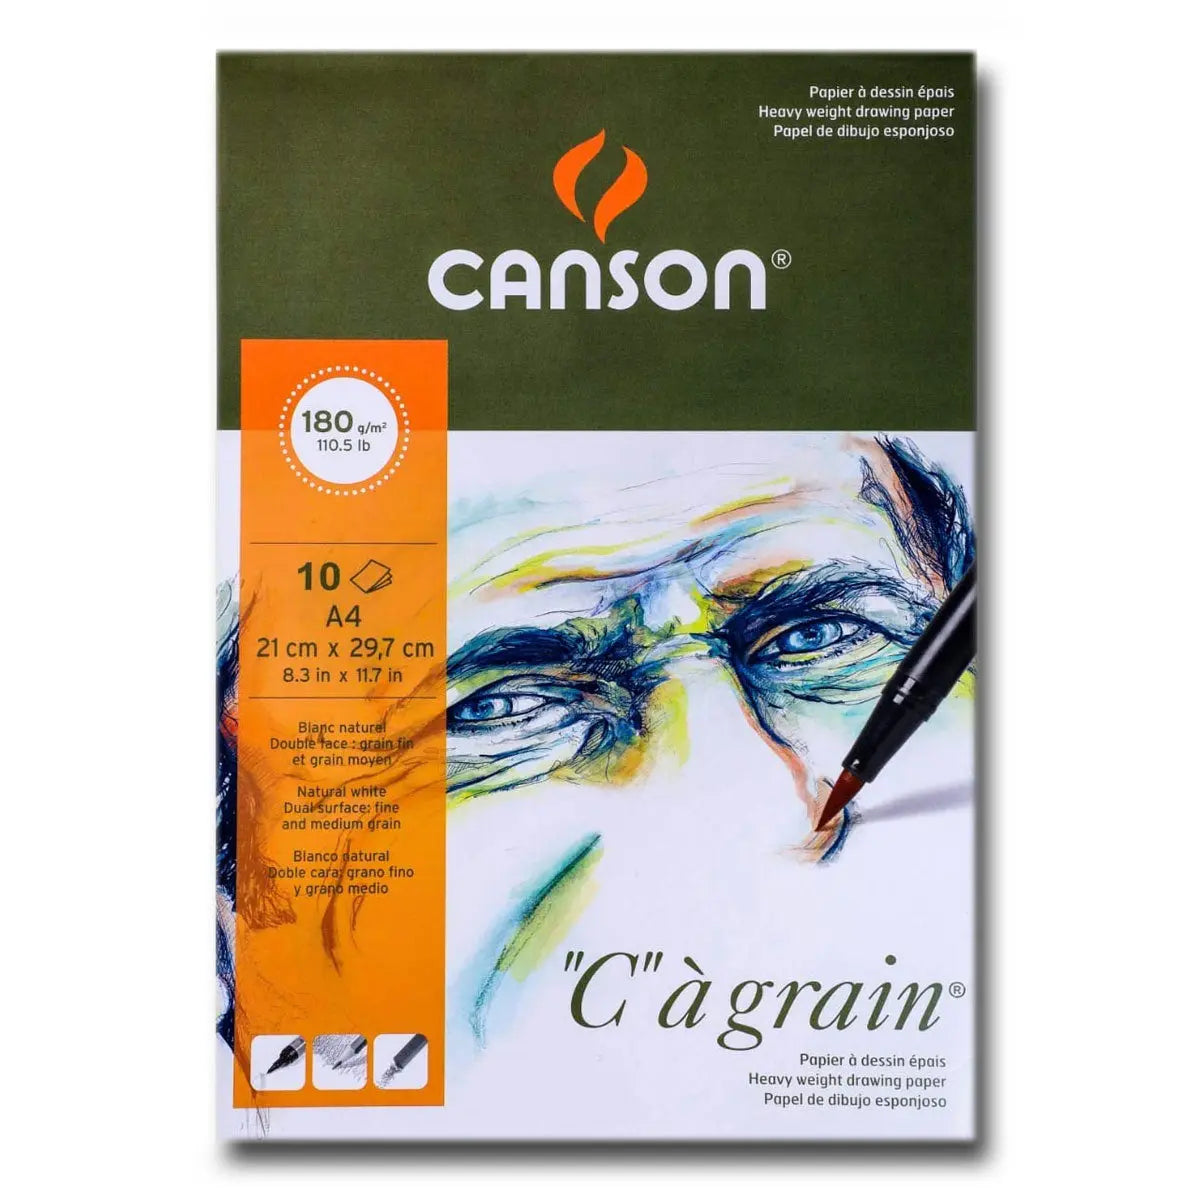 Canson Ca Grain Drawing Paper (125-180-224 GSM) Canson